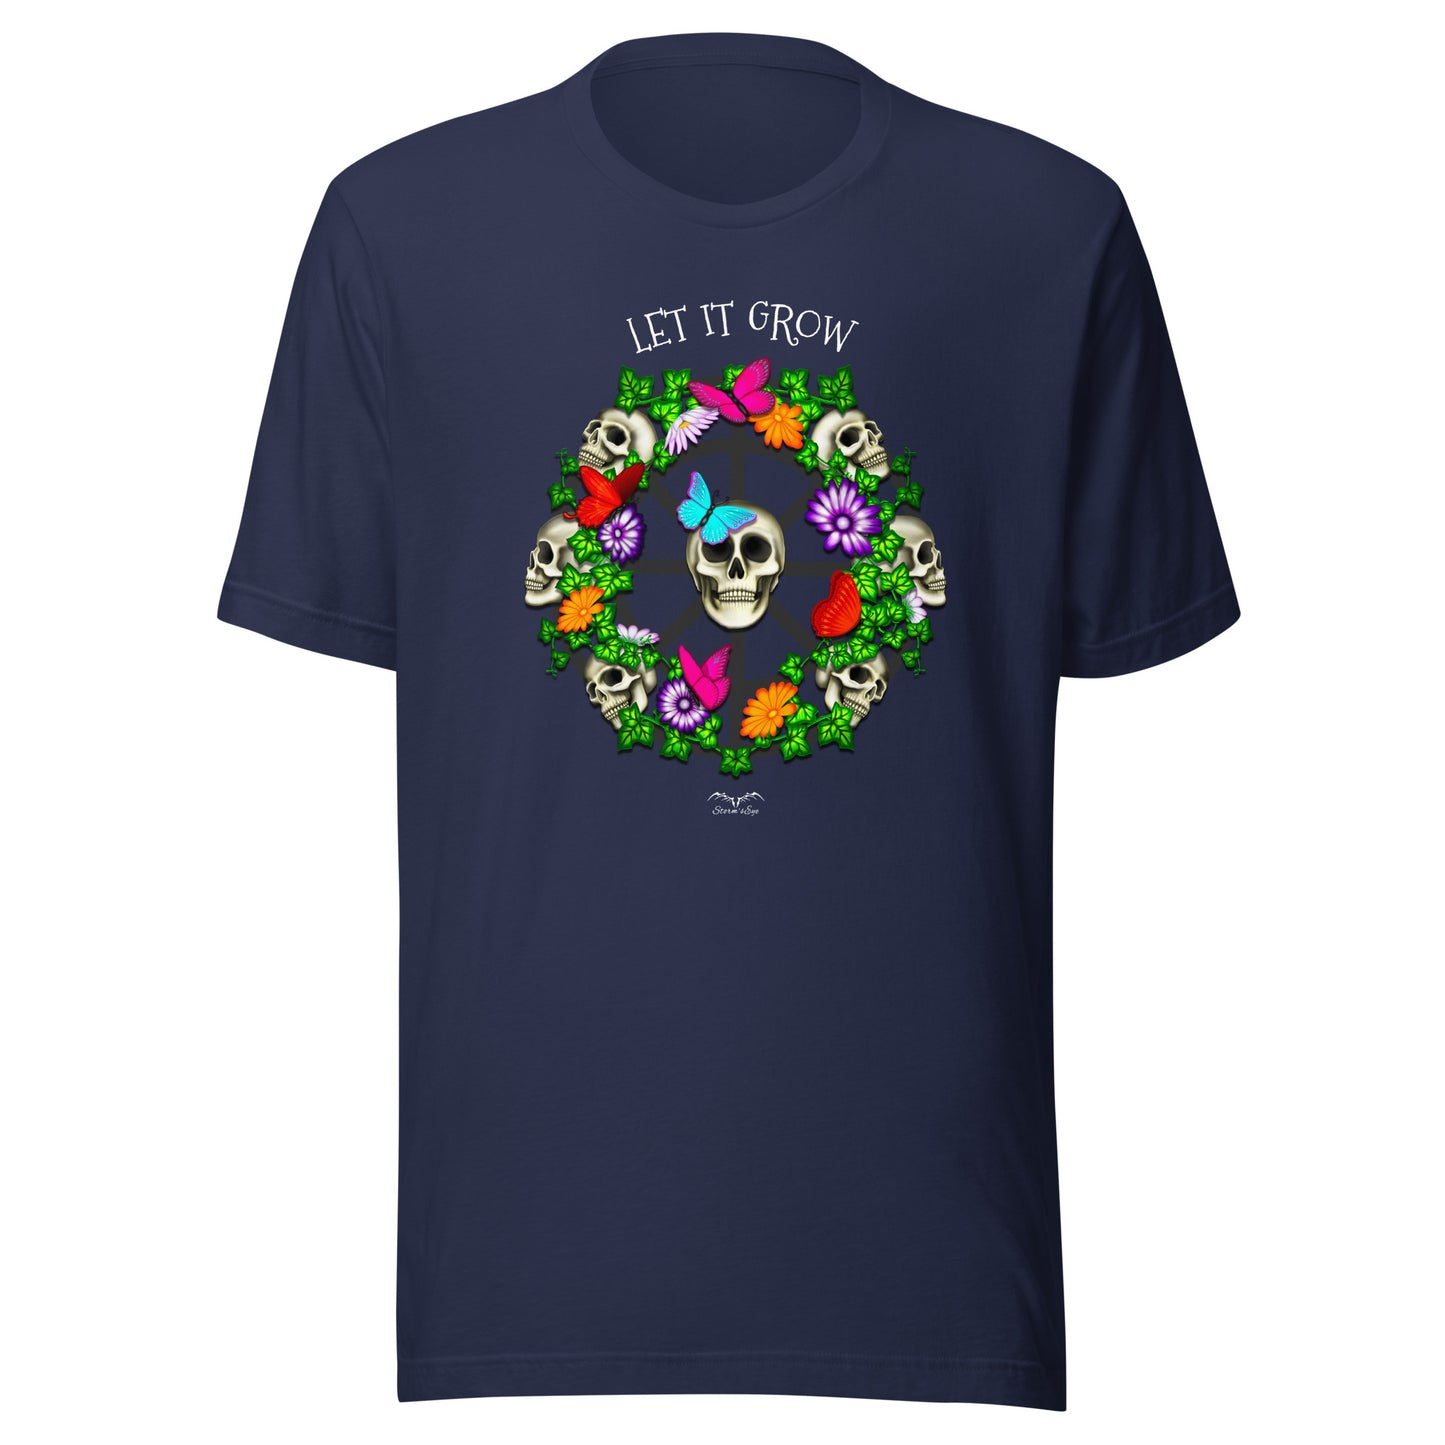 stormseye design skulls and flowers gothic T shirt, flat view navy blue